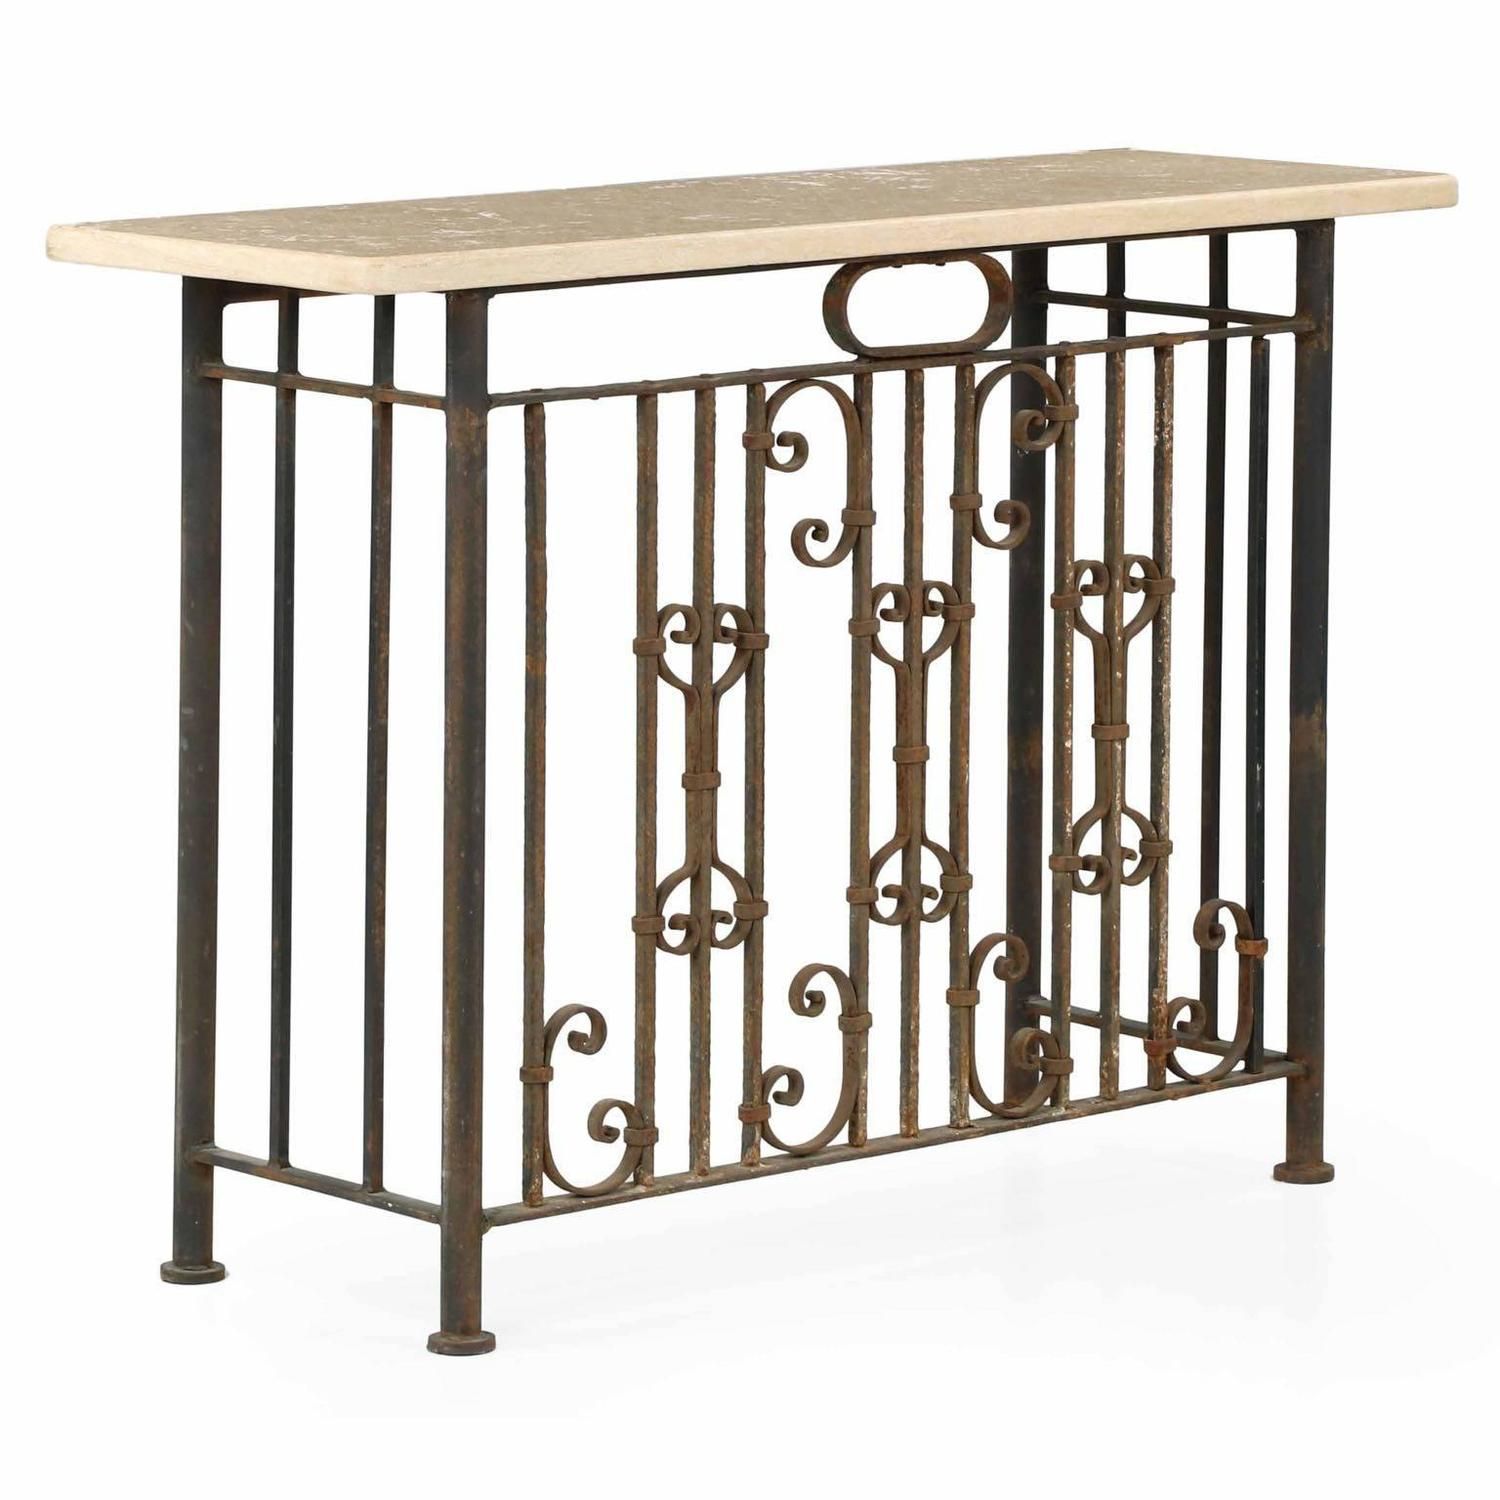 Stone Top Wrought Iron Antique Console Table, Late 19th Within Antique Brass Aluminum Round Console Tables (View 7 of 20)